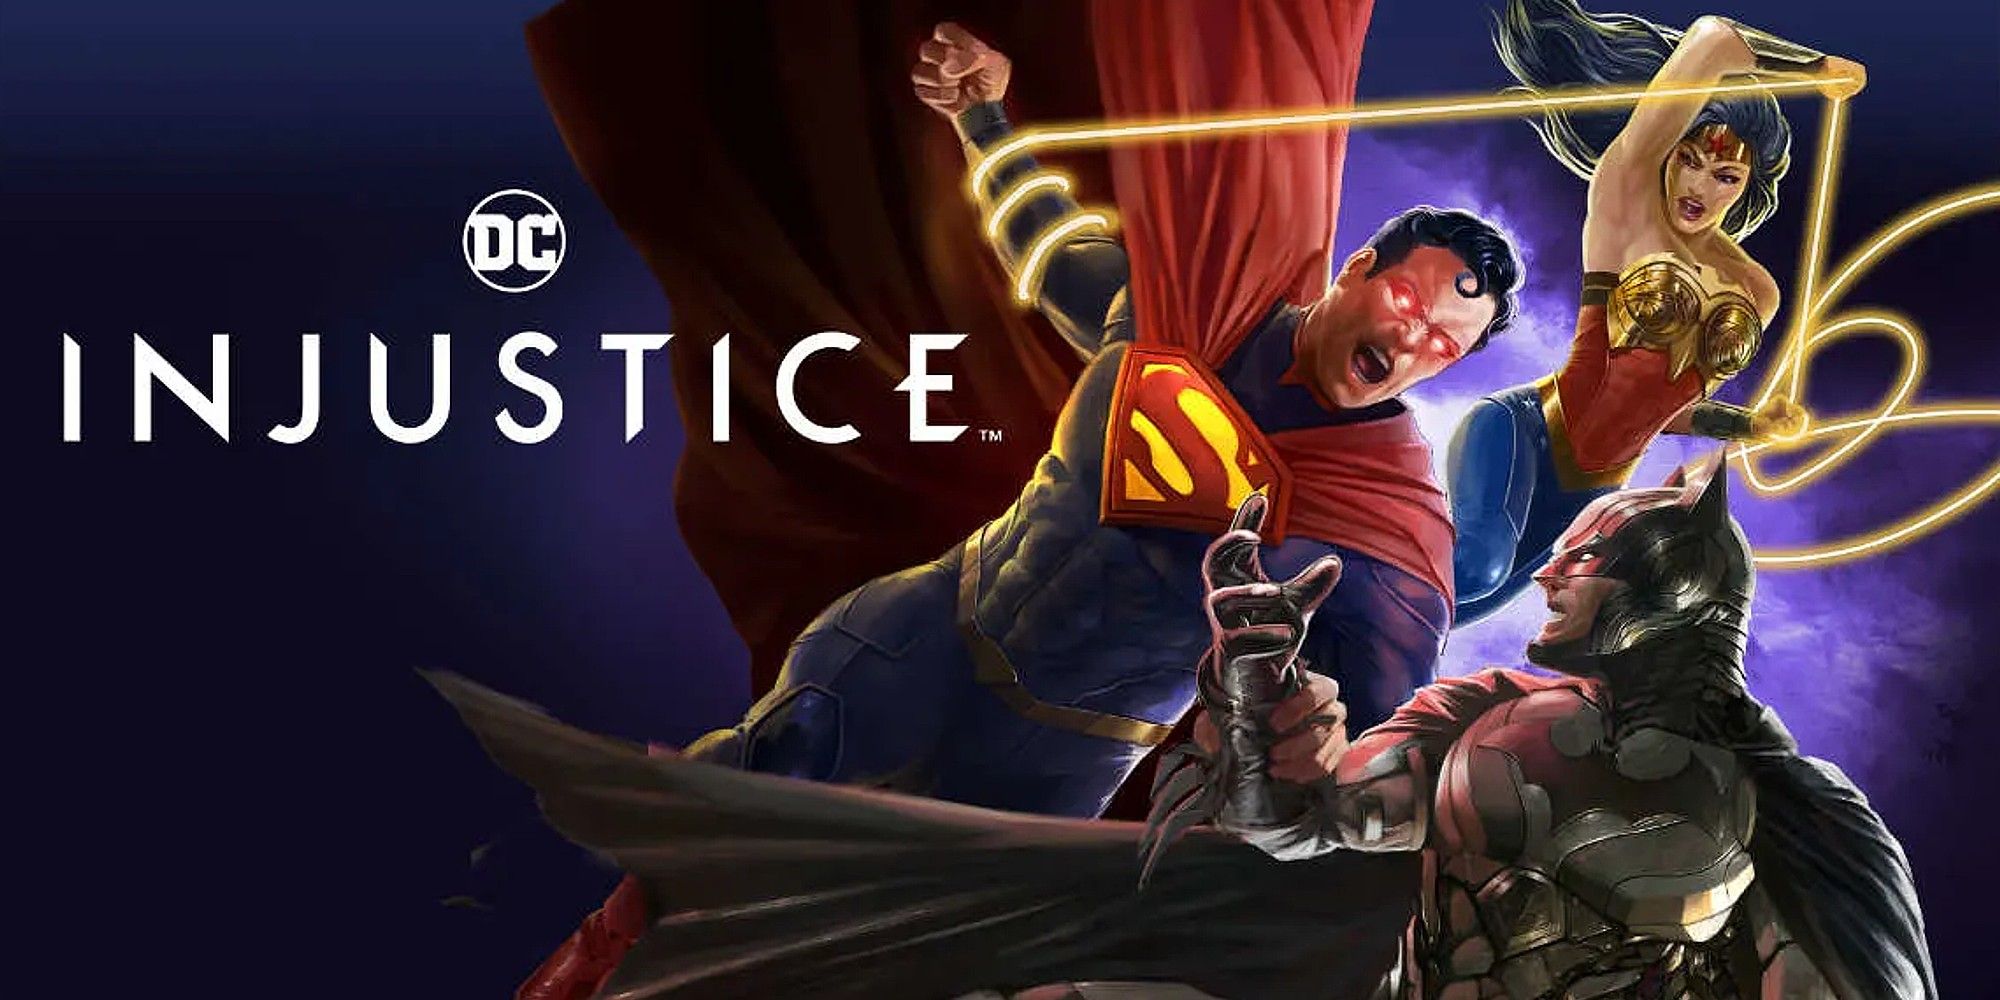 Injustice Animated Movie Poster